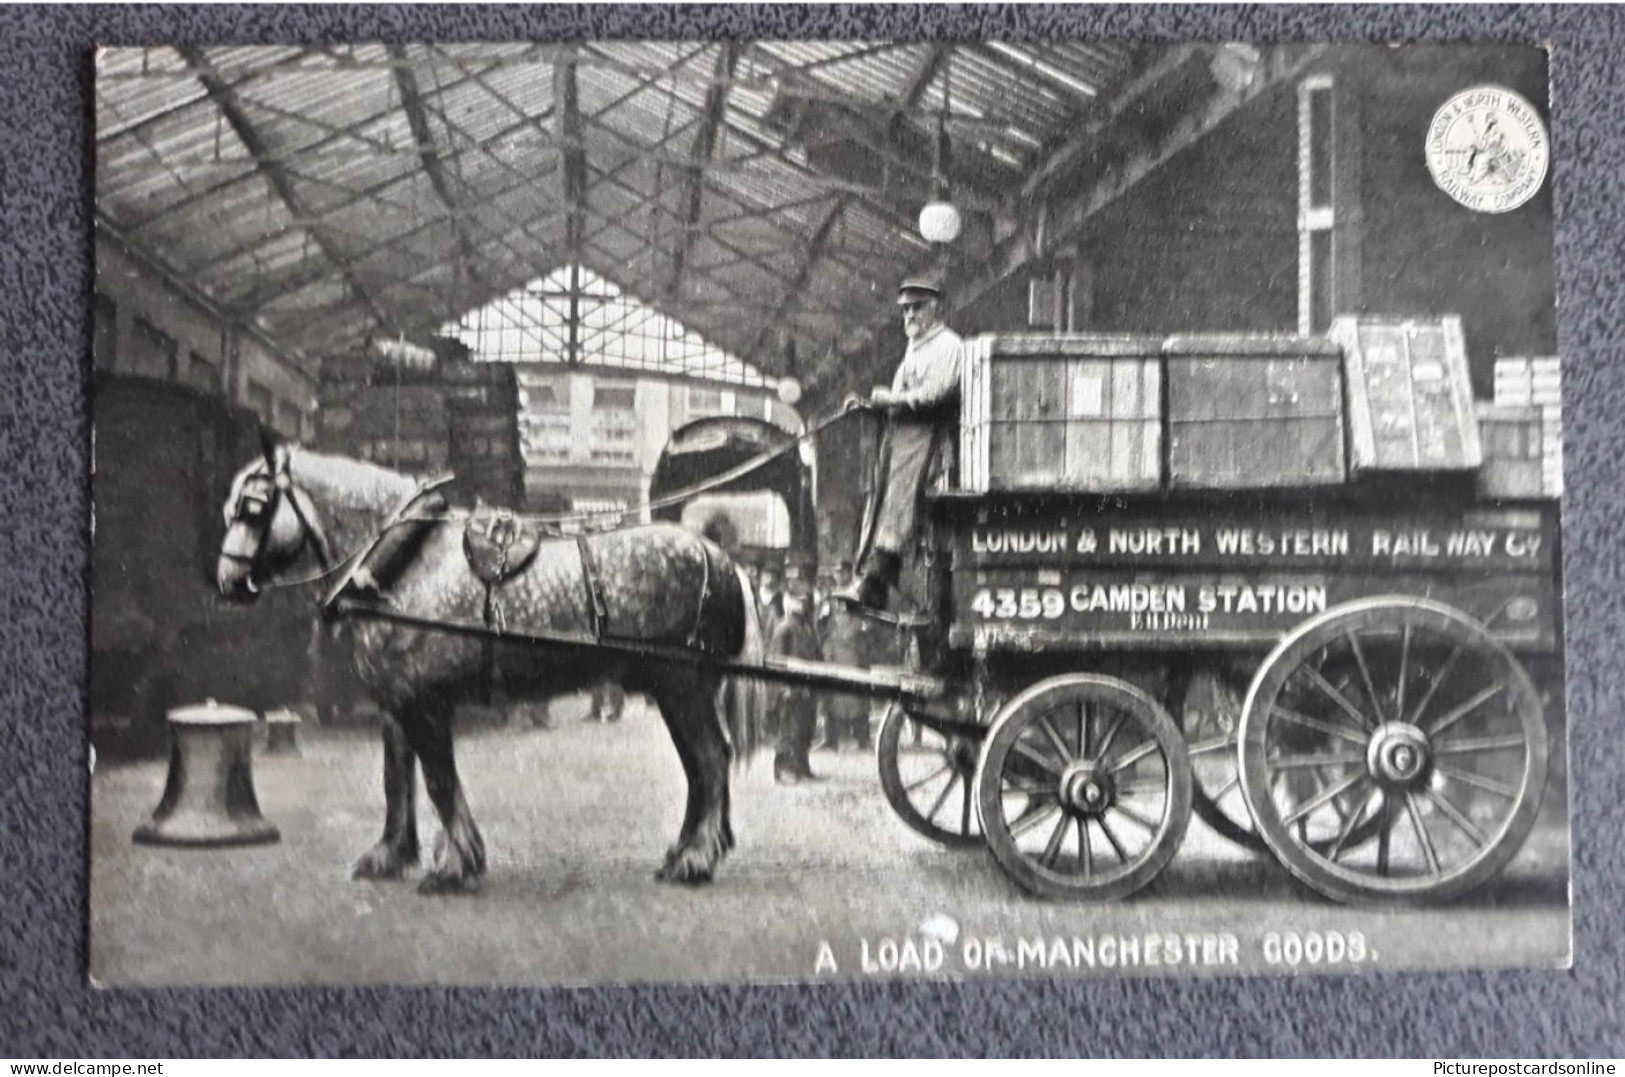 A LOAD OF MANCHESTER GOODS OLD B/W POSTCARD LONDON & NORTH WESTERN OFFICIAL L&N.W.R. CAMDEN STATION - Opere D'Arte